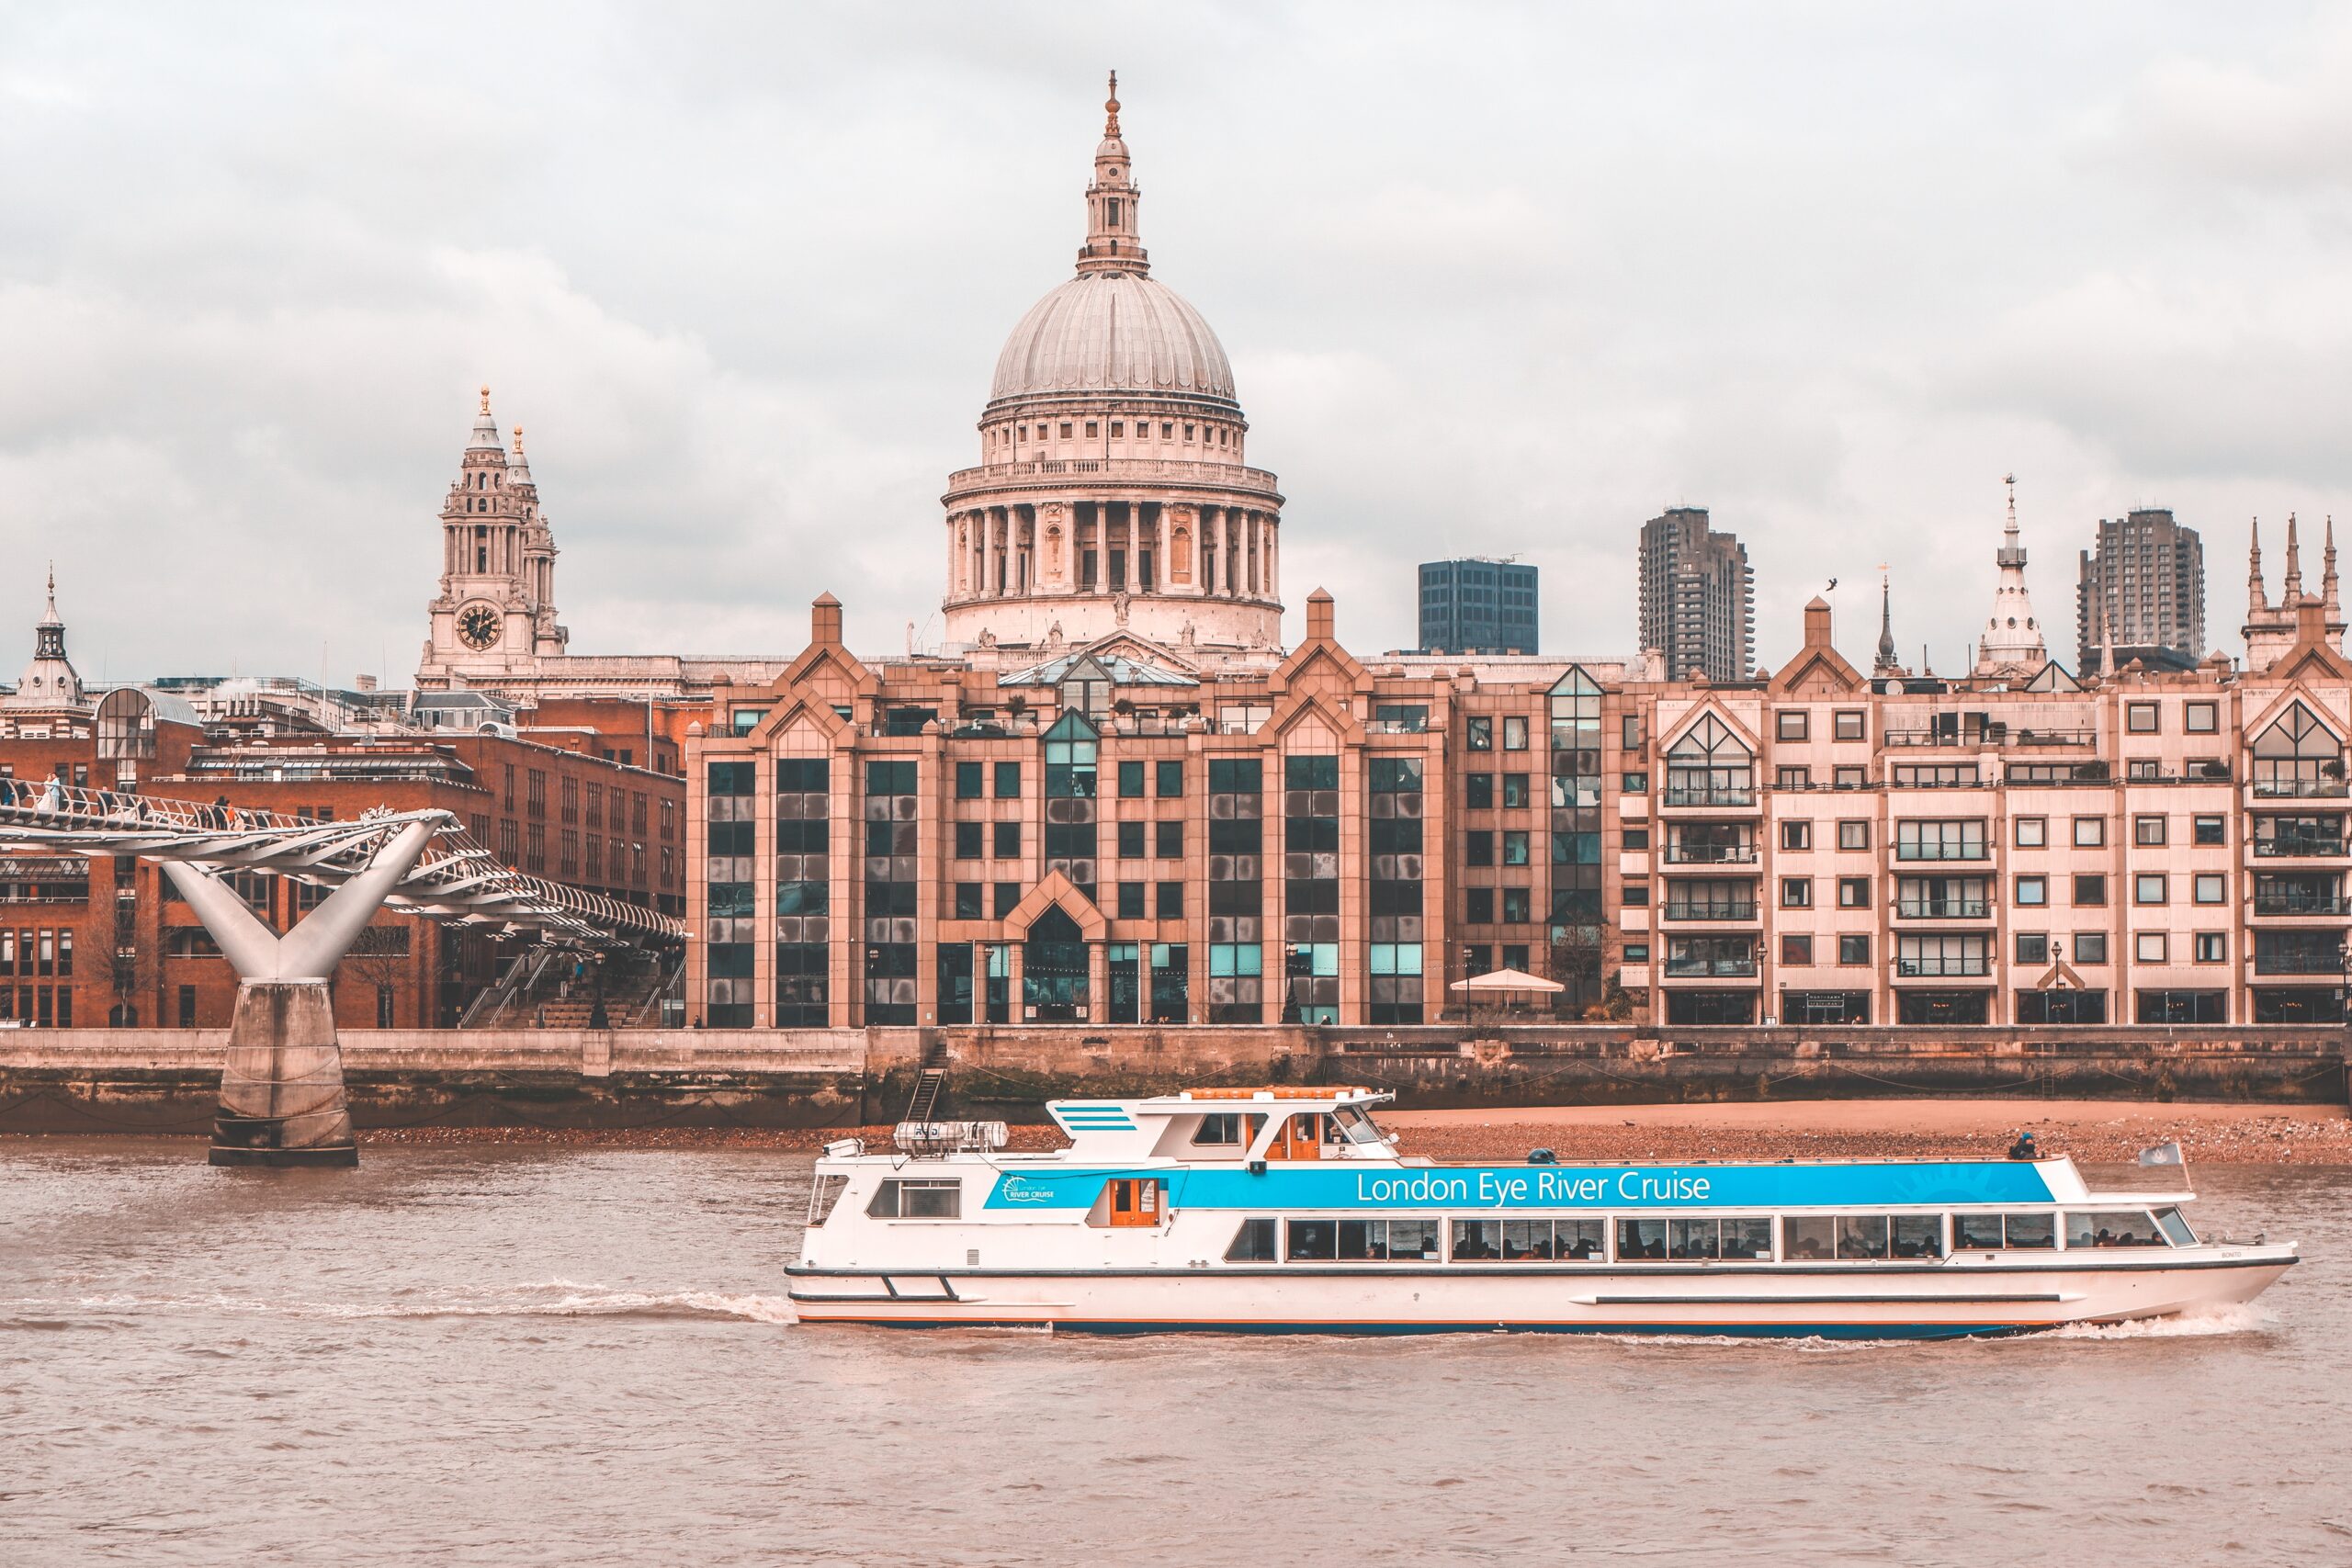 Thames River cruises provide the ultimate relaxation activity for visiting tourists that want to sit back and see all London has to offer. 
pictured: A river cruise boat riding along the Thames River in London